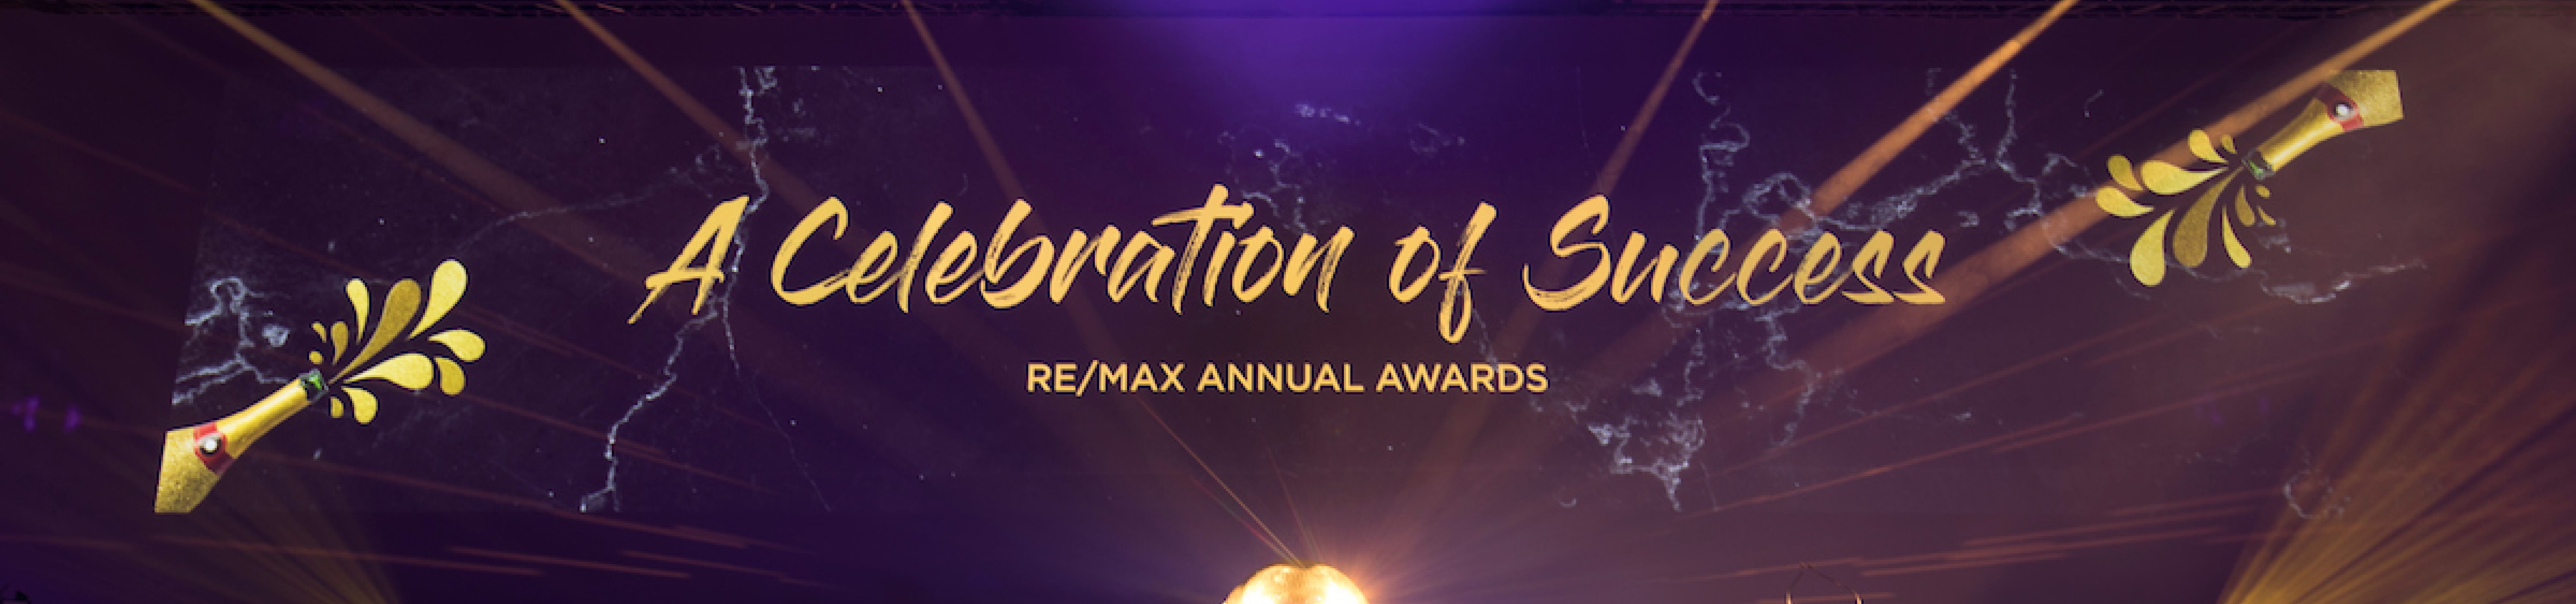 REMAX turns 21 - A celebration of Success - FB2